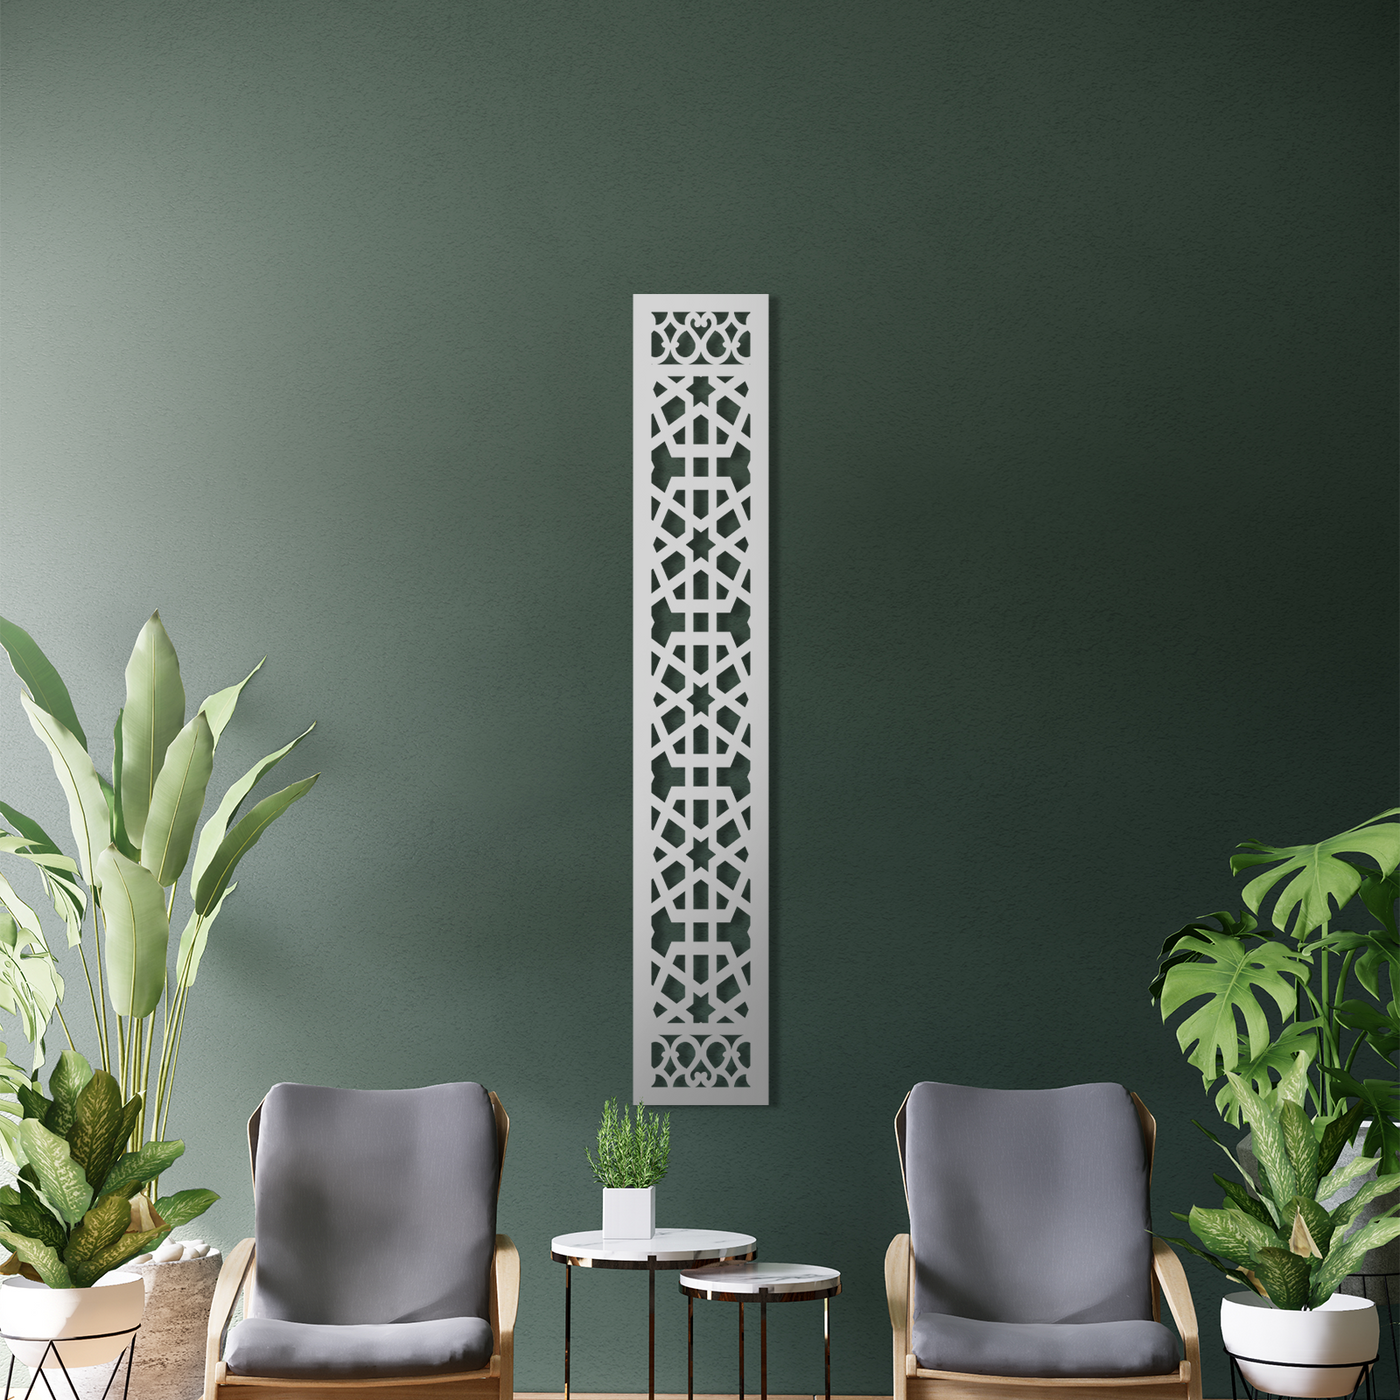 Istanbul Tiles Metal Screen: A Garden Screen that is Both Functional and Stylish